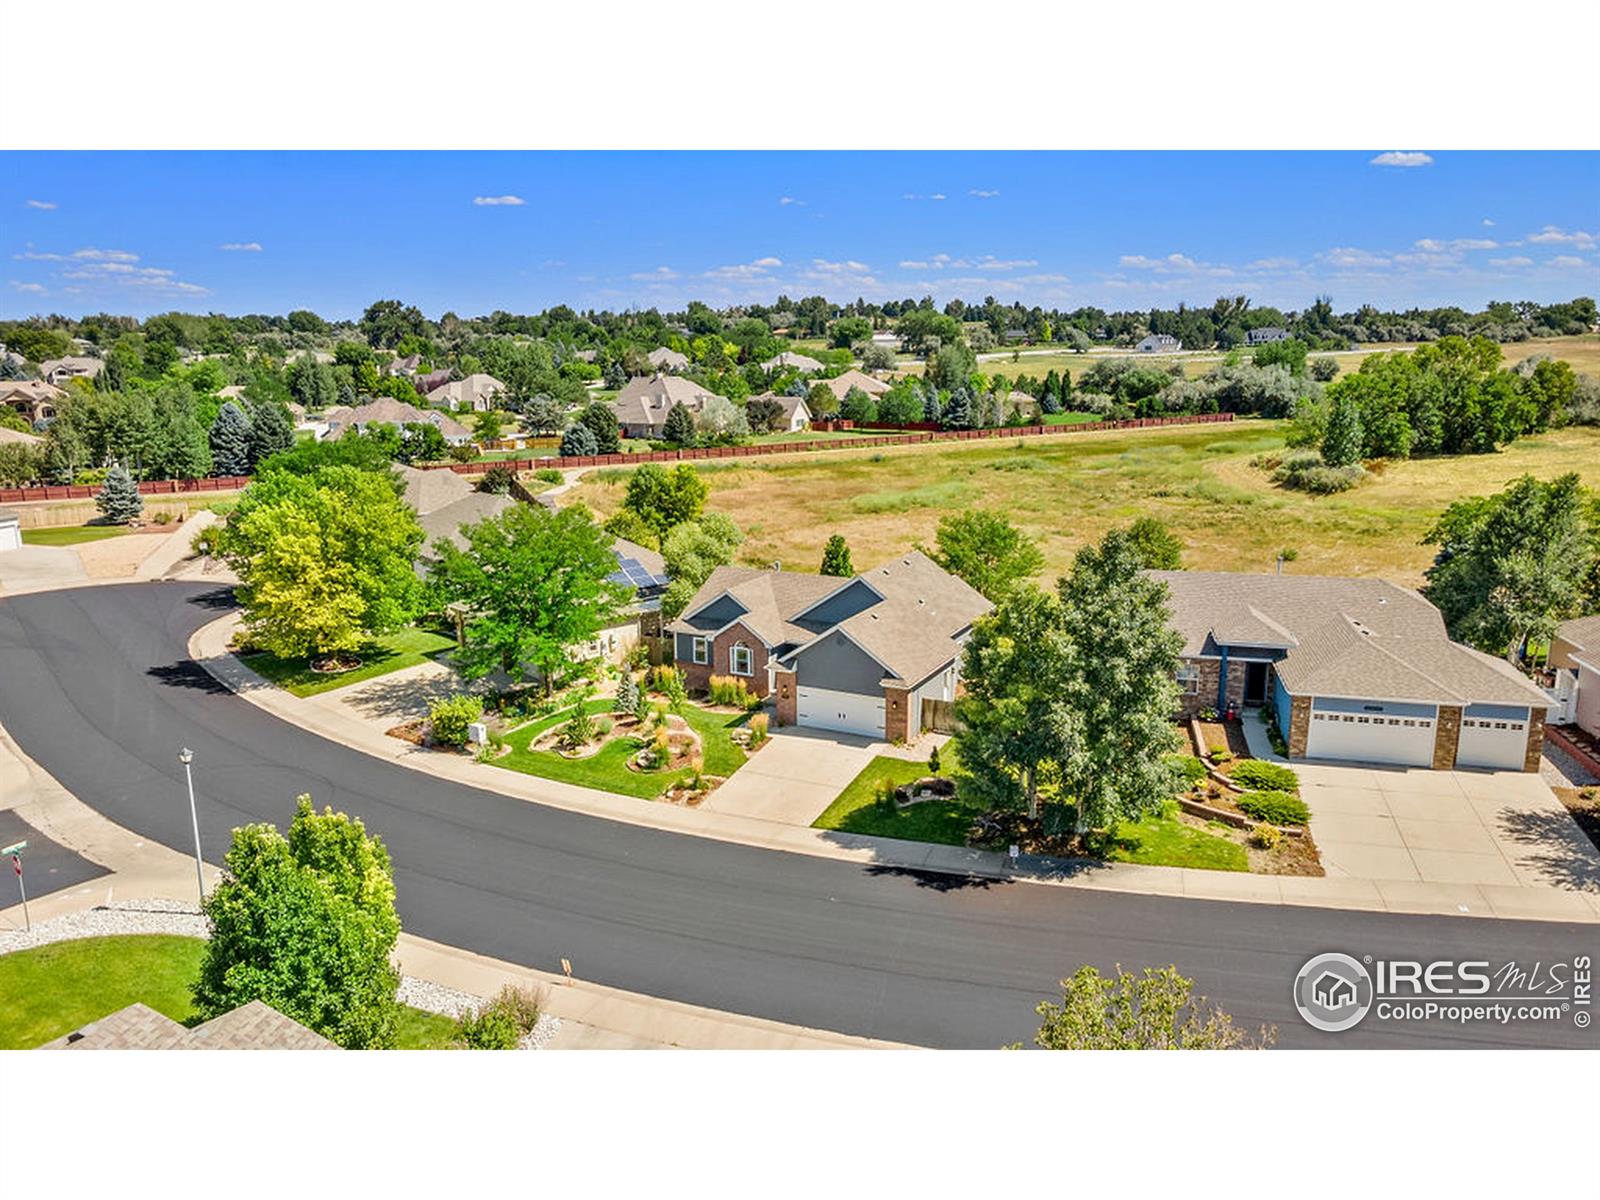 6800 23rd, Greeley, CO